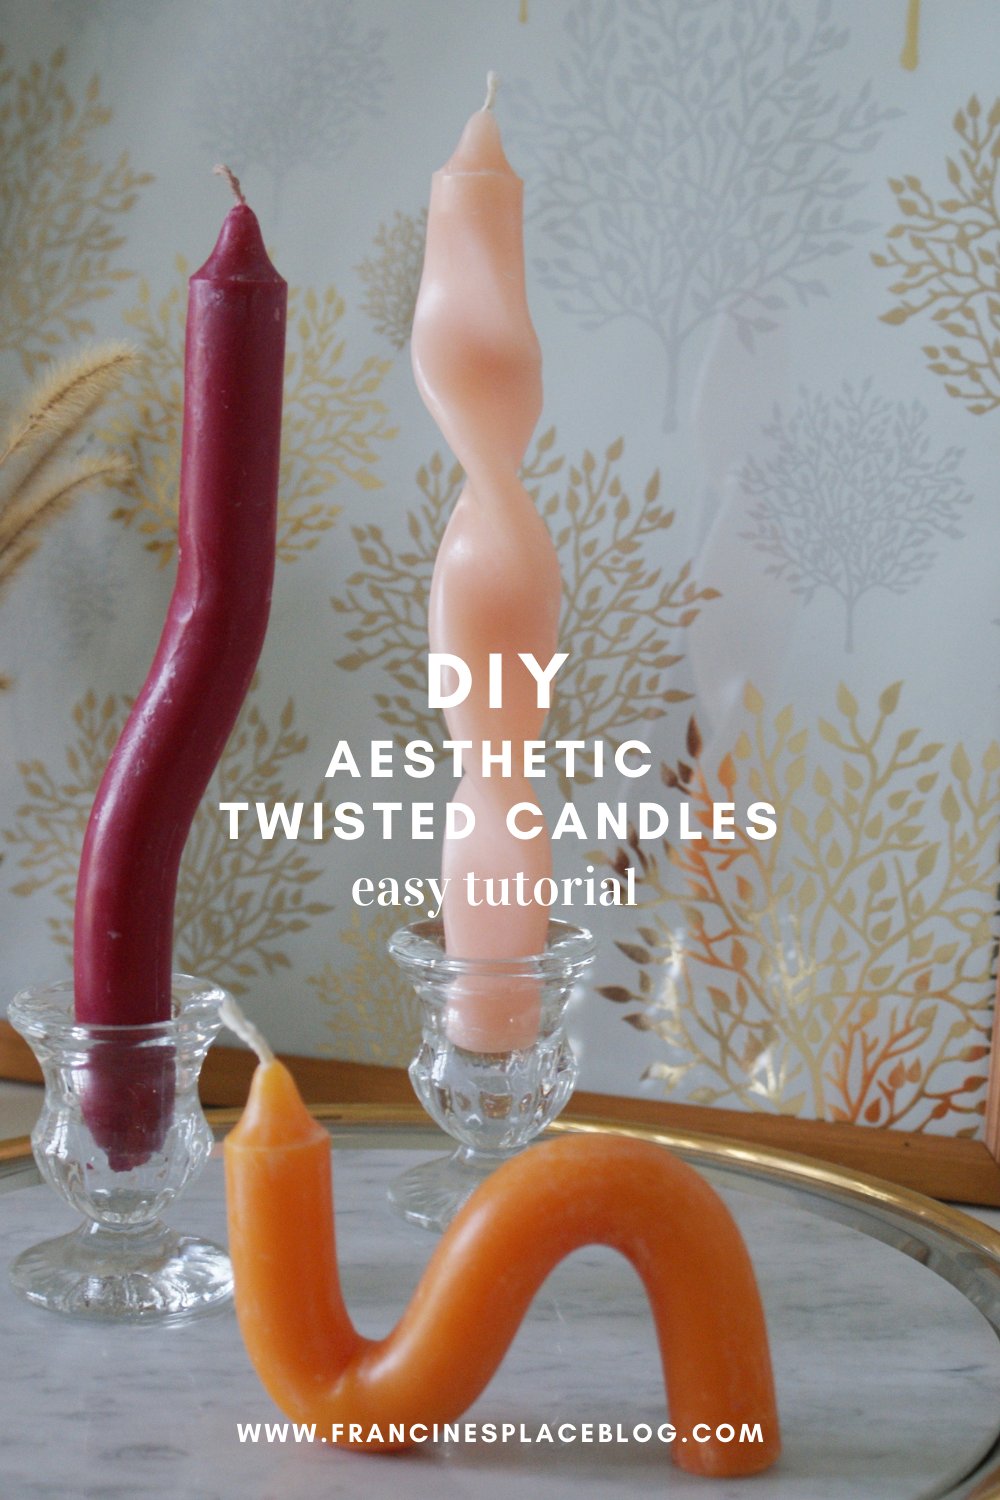 diy aesthetic twisted candles how make home decoration decorate fell idea craft easy tutorial sculpture francinesplaceblog pinterest